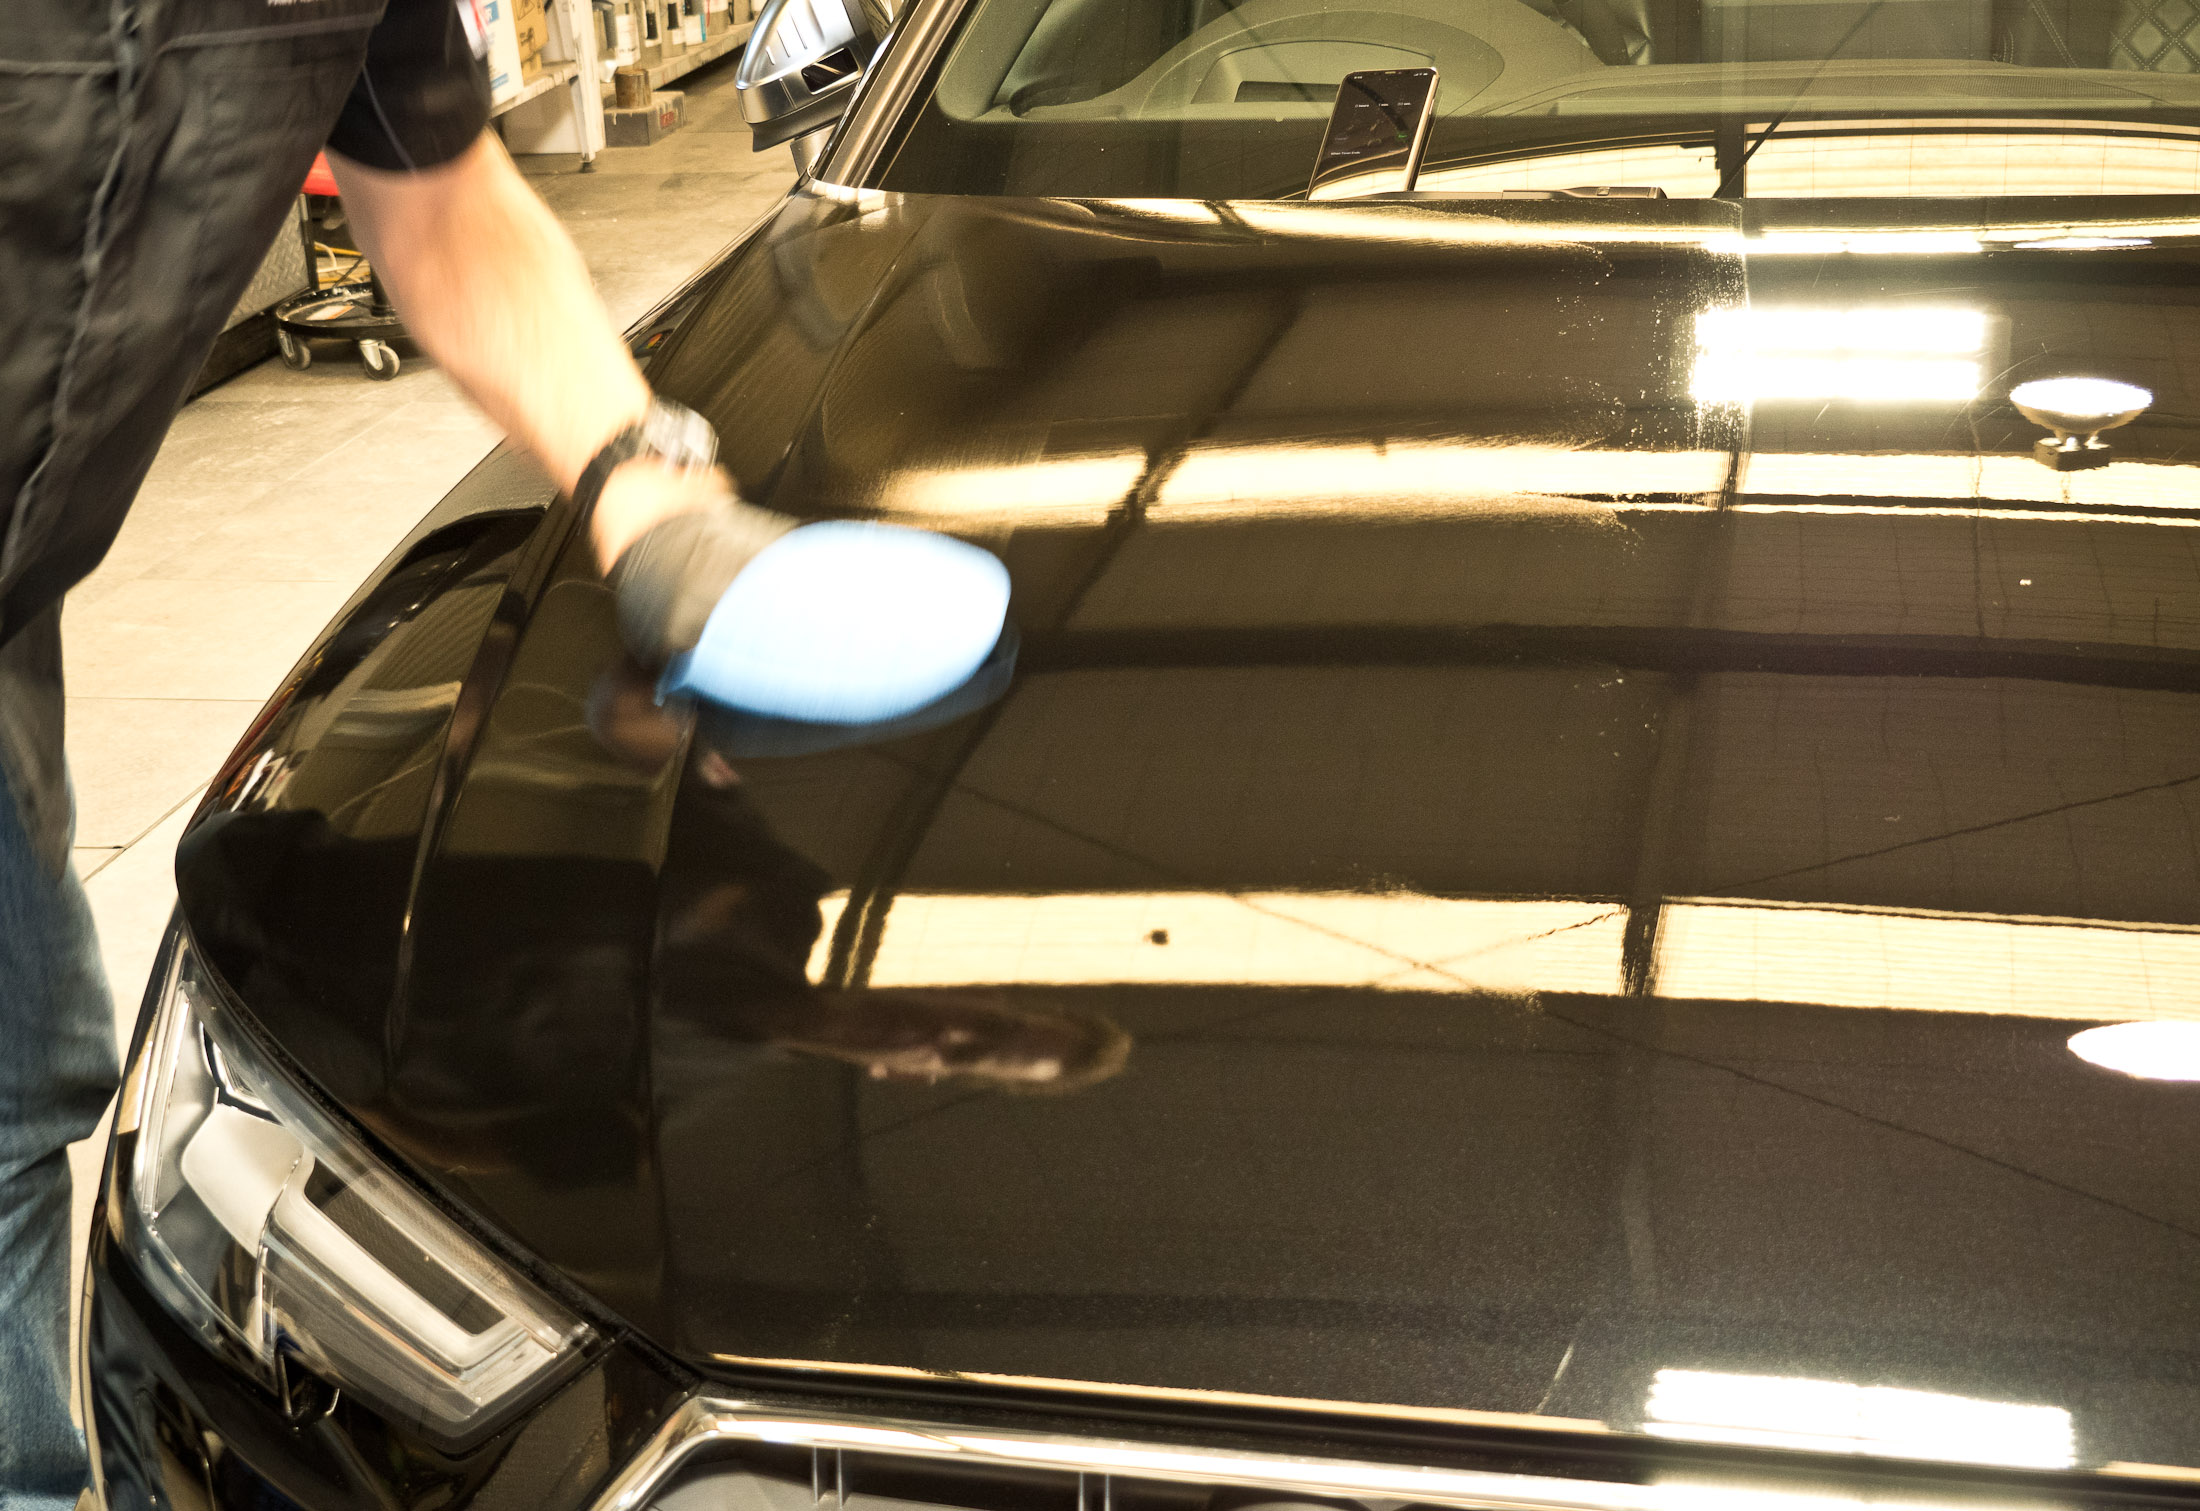 Comparison on the vehicle bonnet during coating application